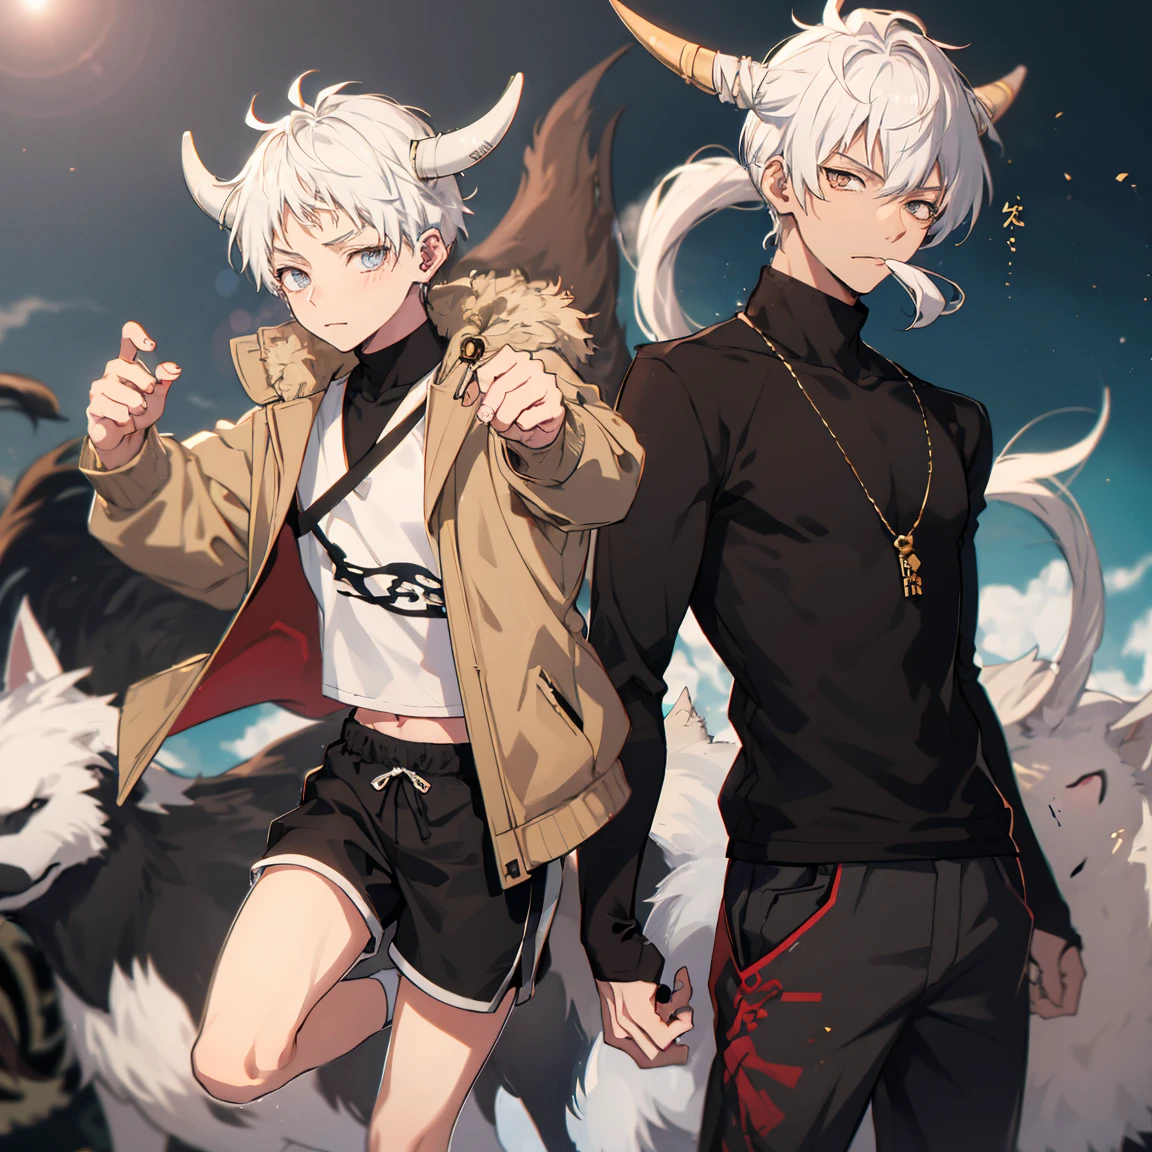 One young man, oni, small horns, shaggy hairstyle, short hair, modern clothes, handsome, bishounen, anime style, friendly looking, strong, slightly built body, modern setting, white hair, sassy attitude